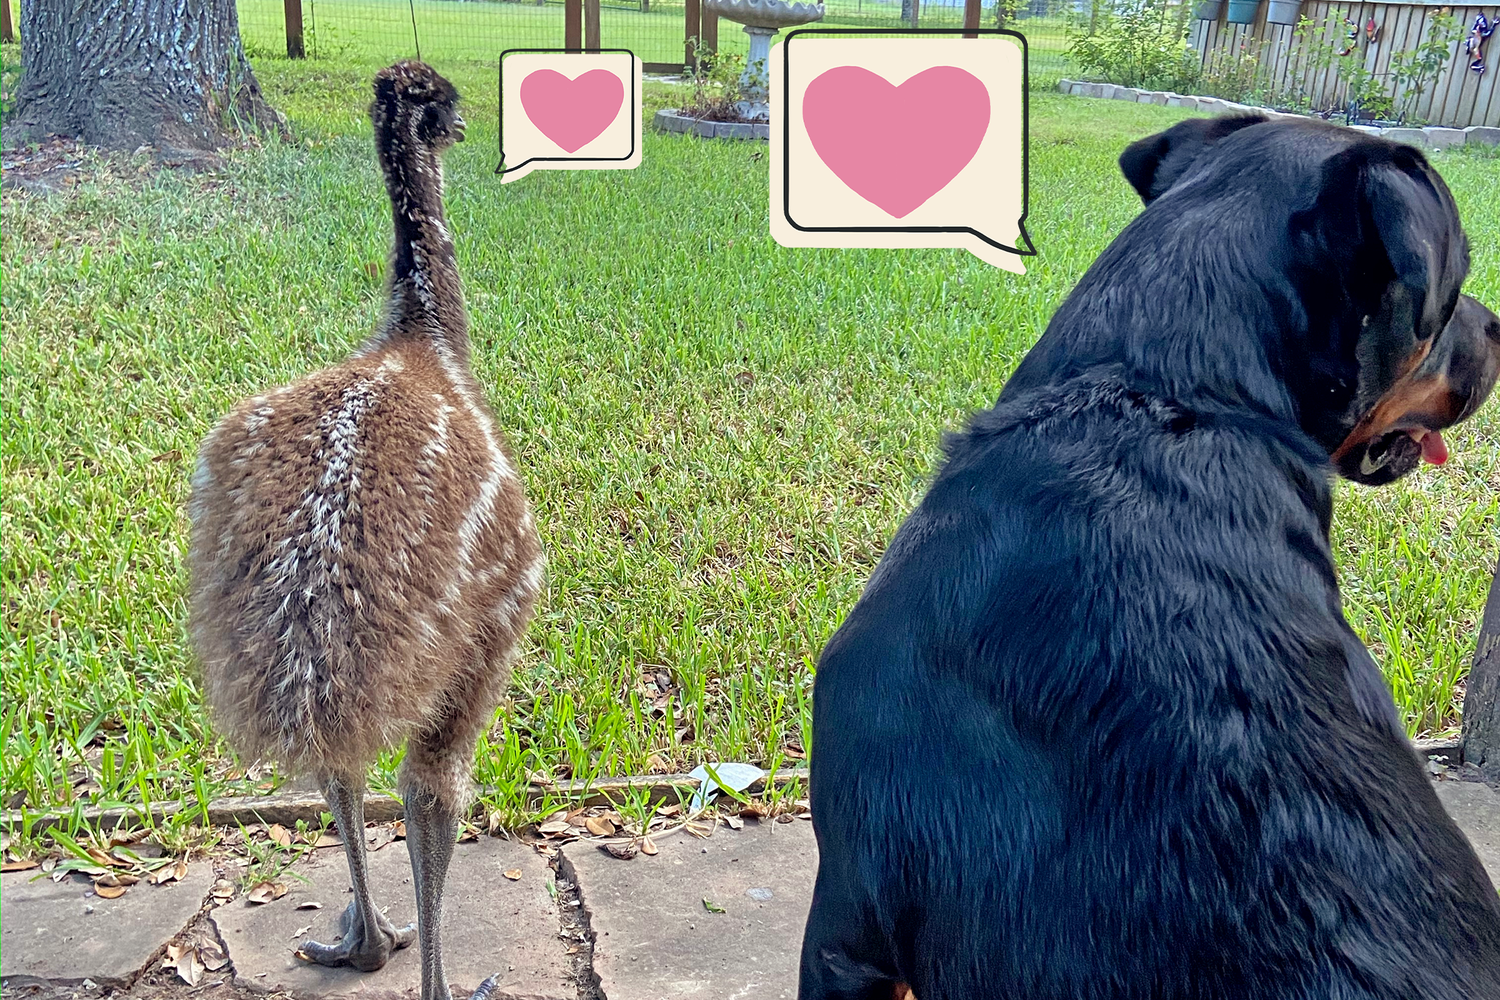 Rottweiler and emu together are best friends